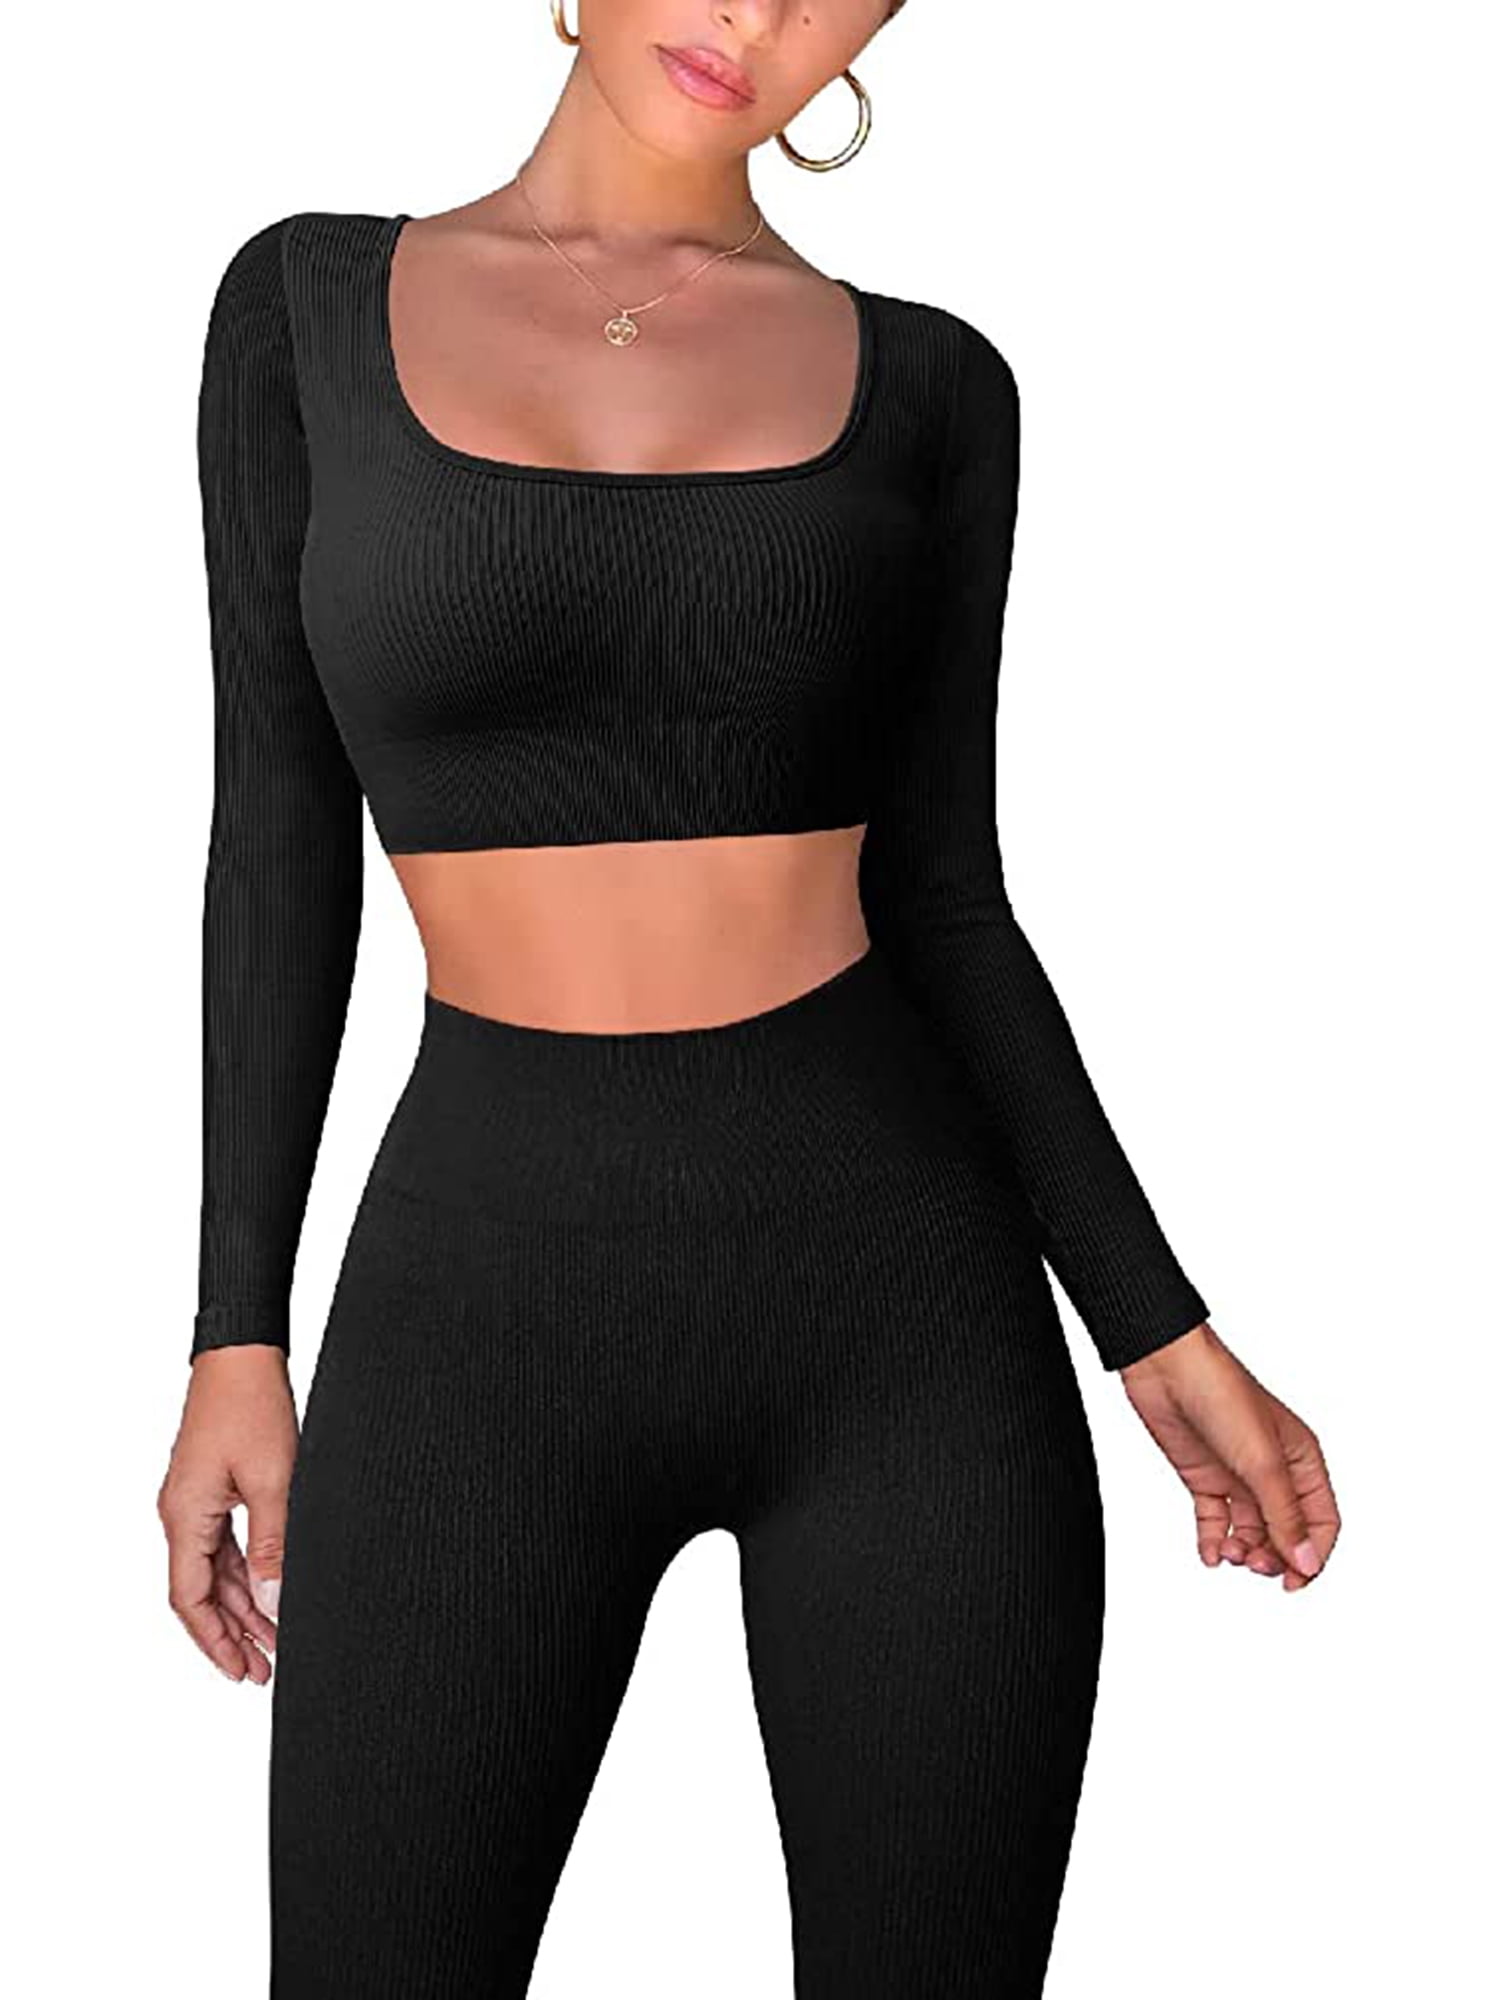 Women's 2 Piece Workout Outfits Sexy Skinny Long Sleeve Crop Top